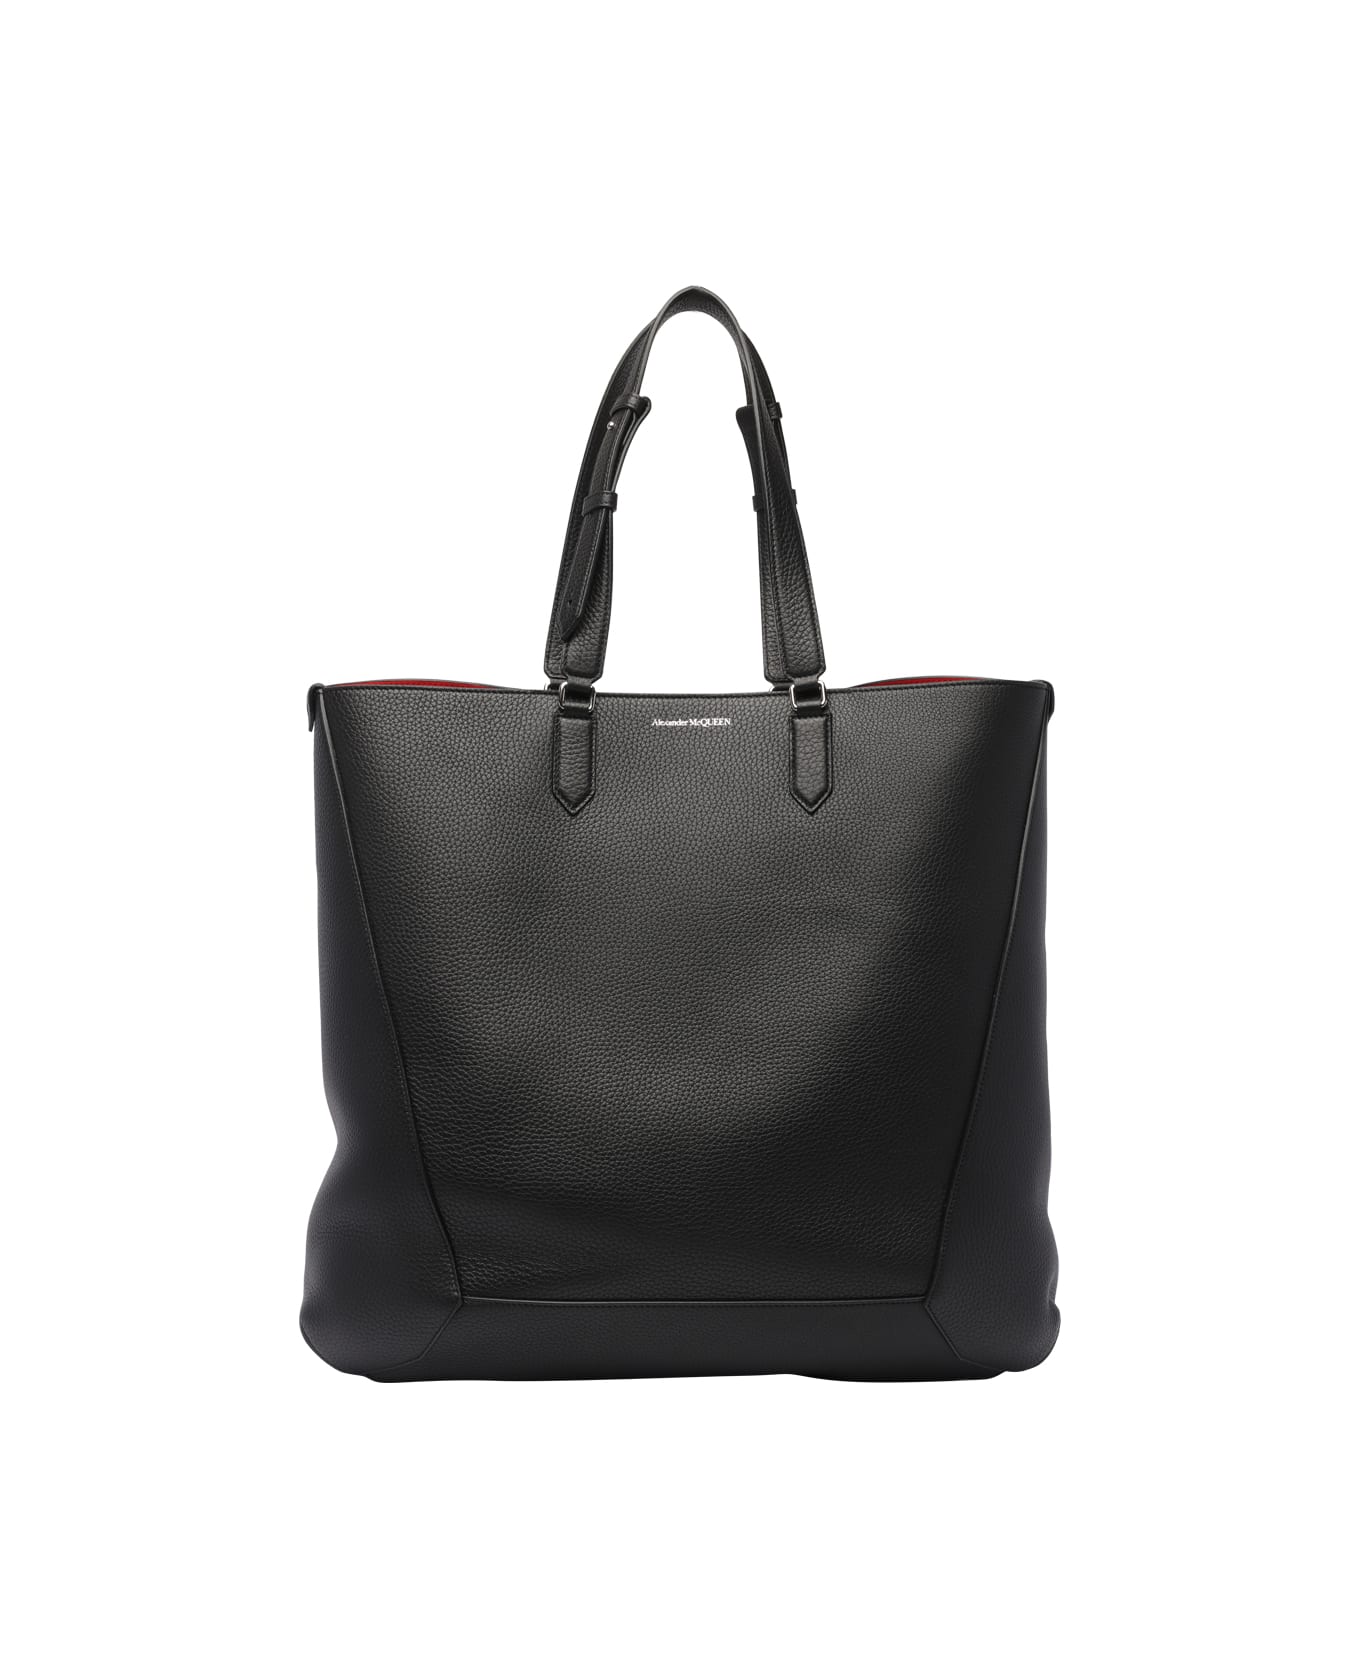 Alexander McQueen Tote Bag Large The Edge - Black トートバッグ